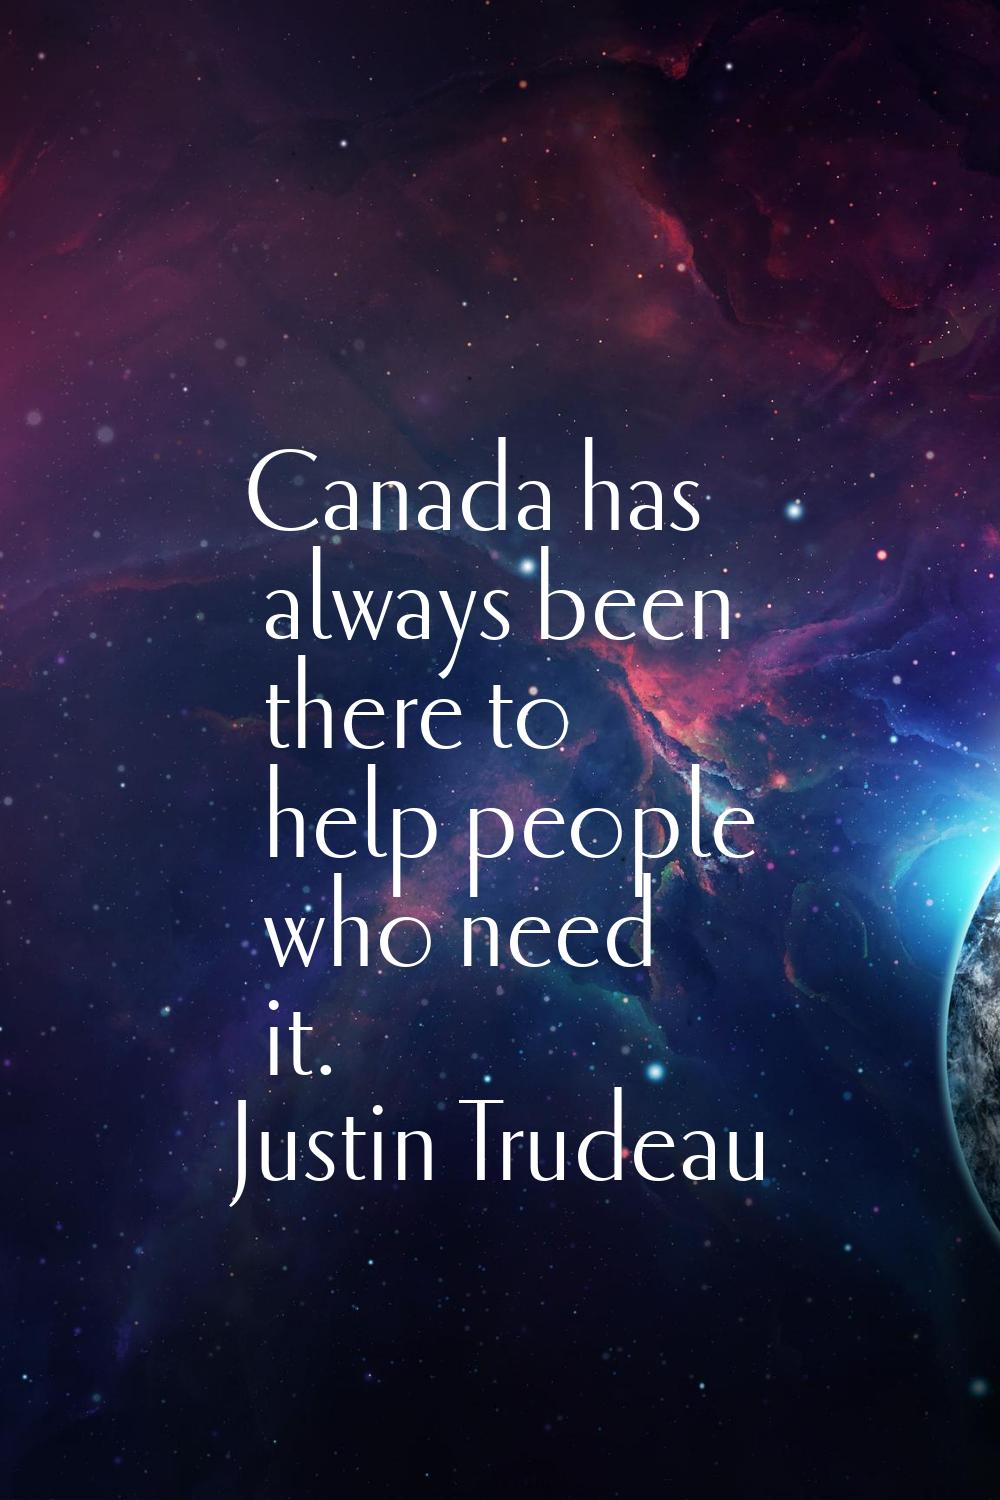 Canada has always been there to help people who need it.